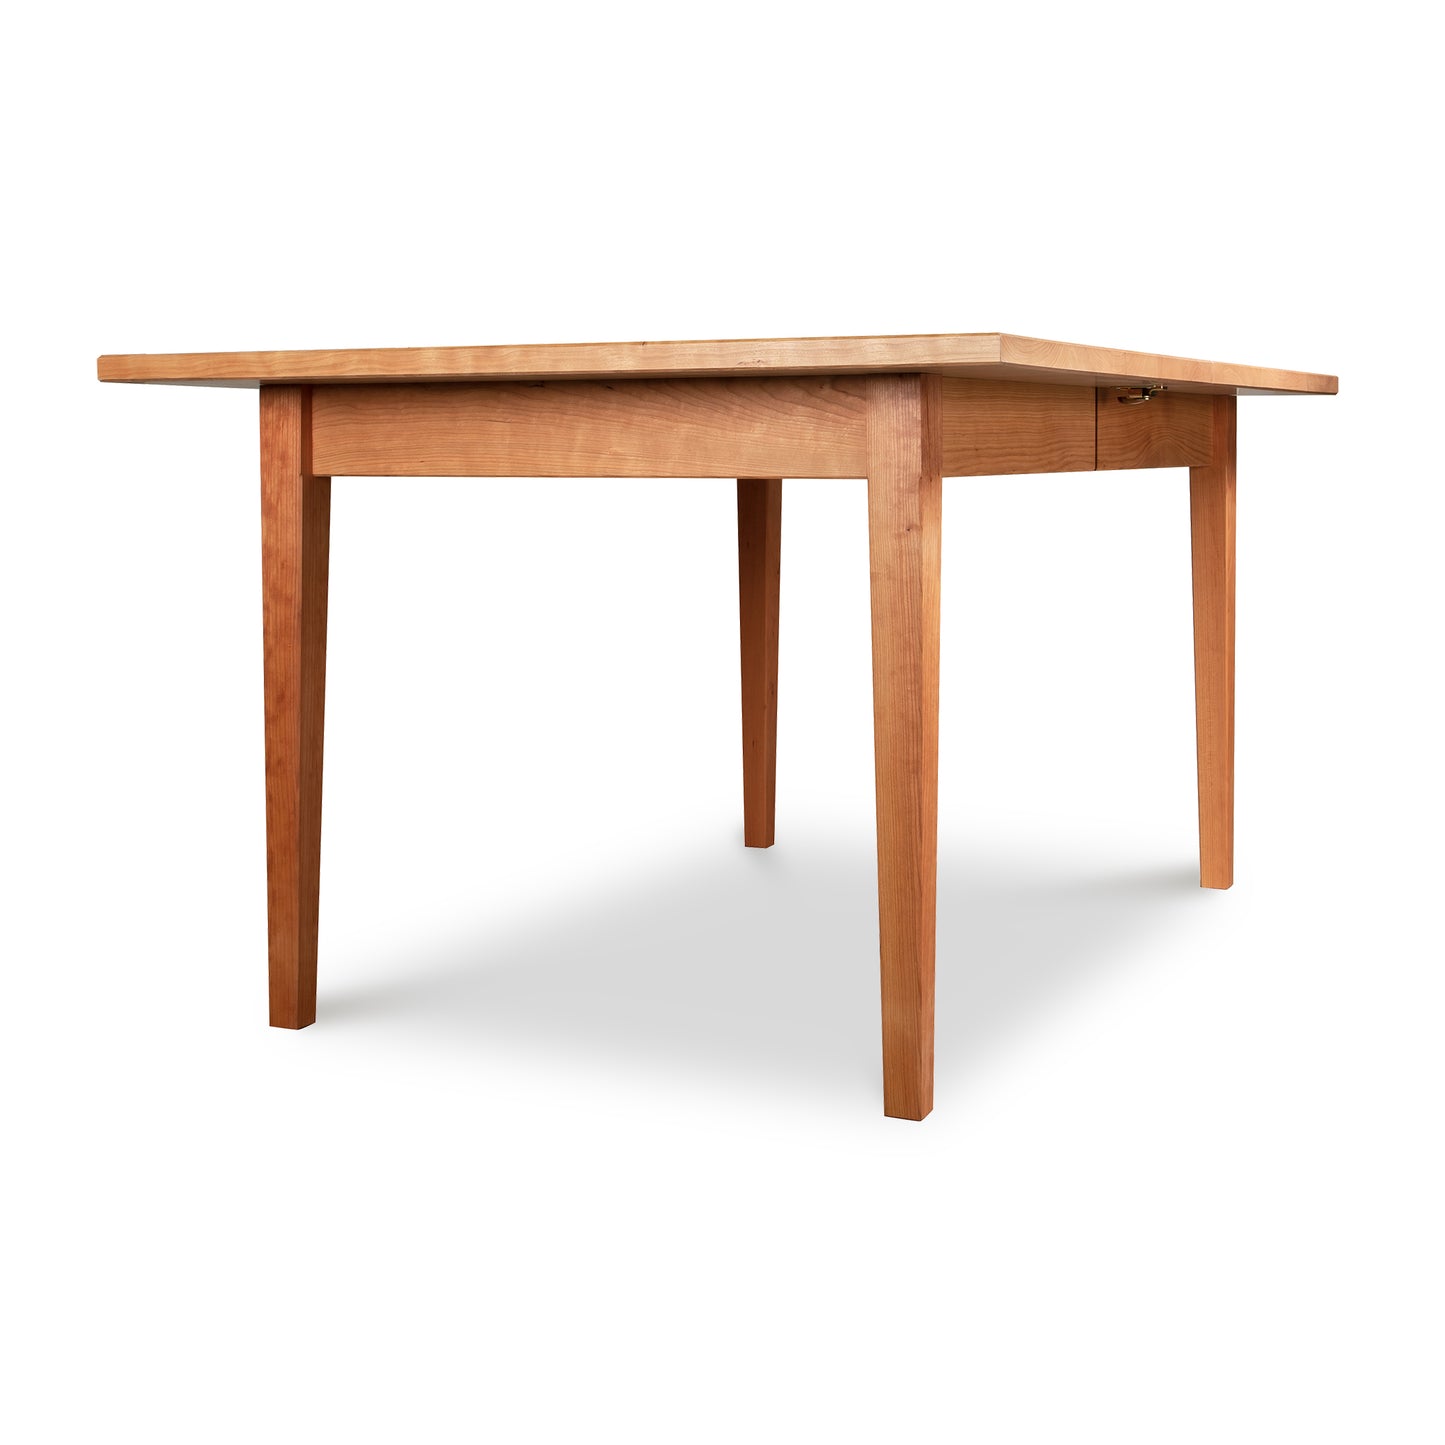 A handcrafted Maple Corner Woodworks Vermont Shaker Rectangular Extension Dining Table made from solid wood, featuring a wooden top and legs.